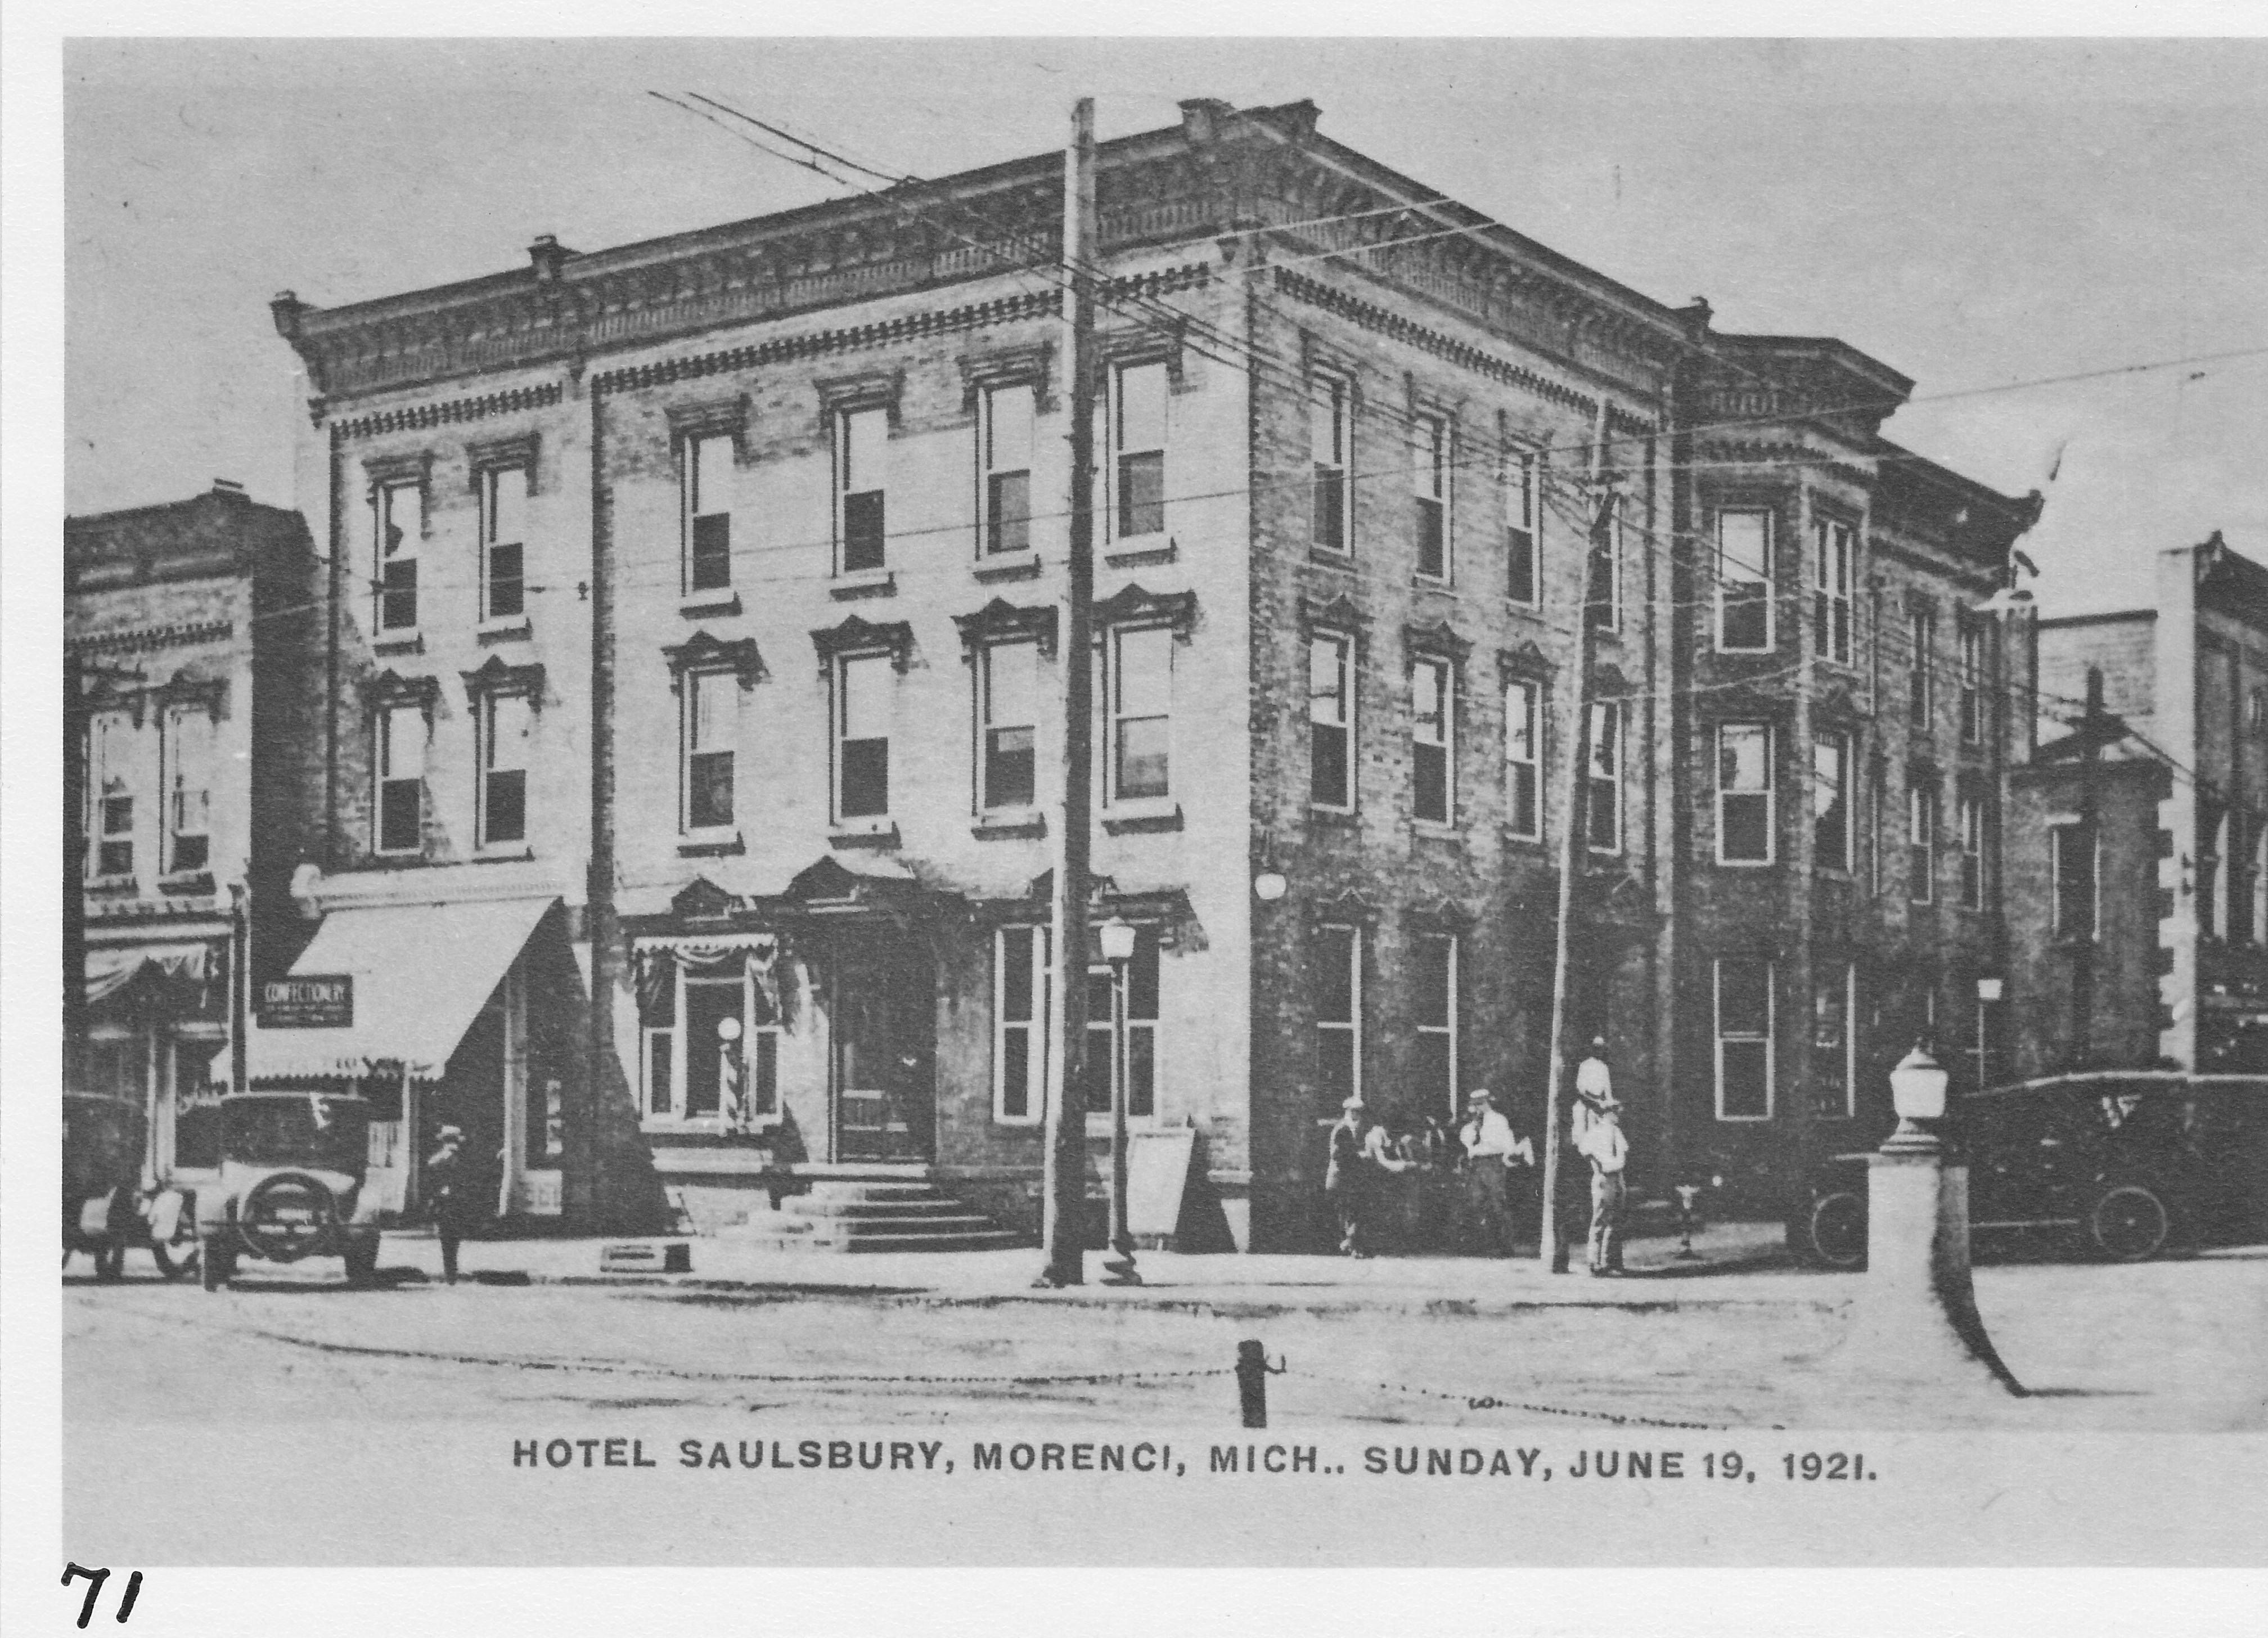 Hotel Saulsbury in 1921.  Traffic in center of street.  Had to drive around light to make a turn.